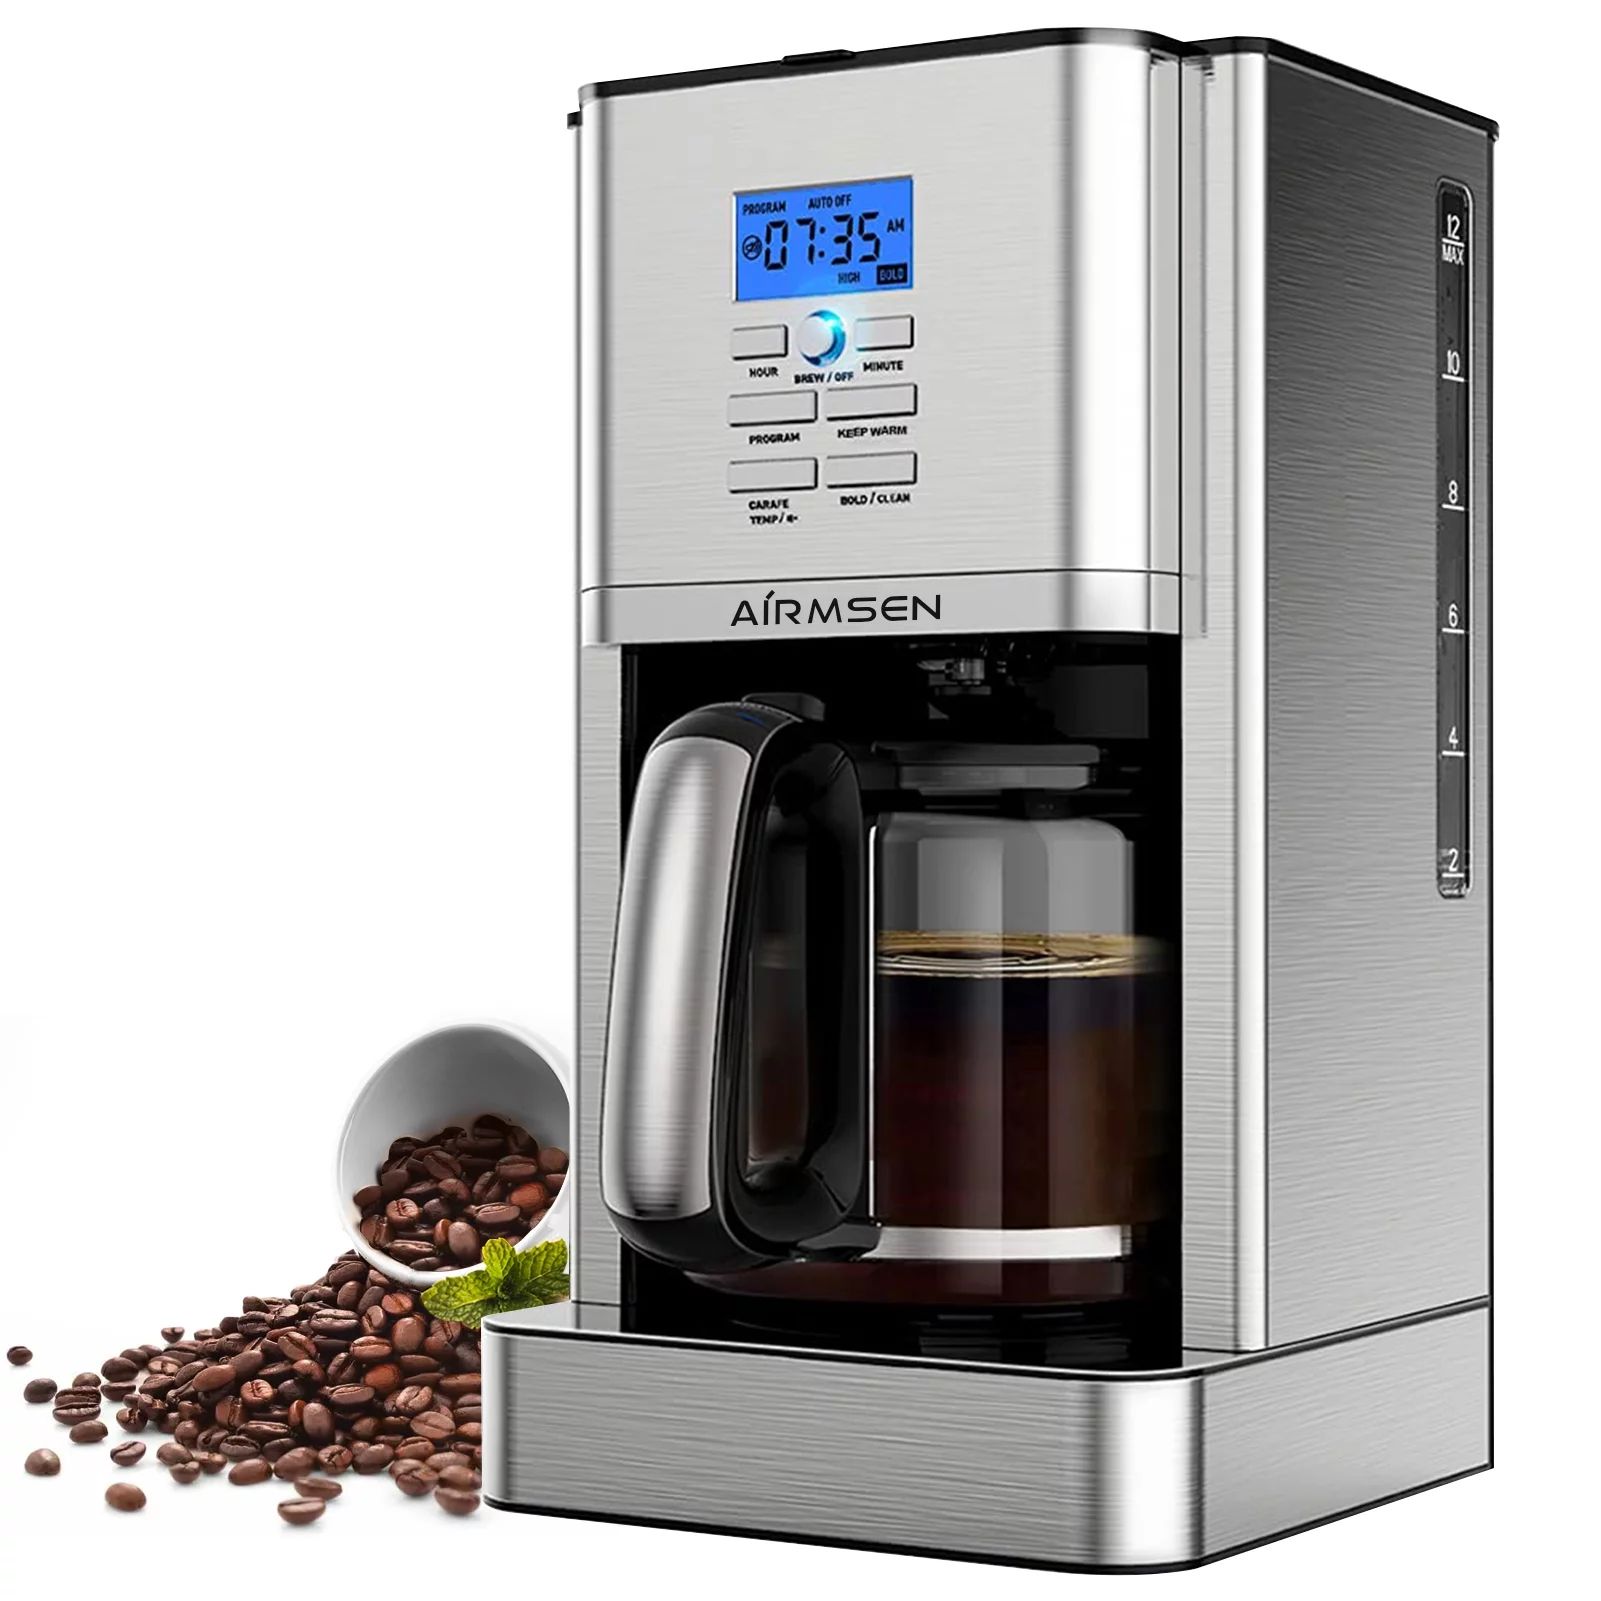 AIRMSEN Stainless Steel 12 Cup Drip Coffee Maker, Programmable Coffee Machine Self-Cleaning | Walmart (US)